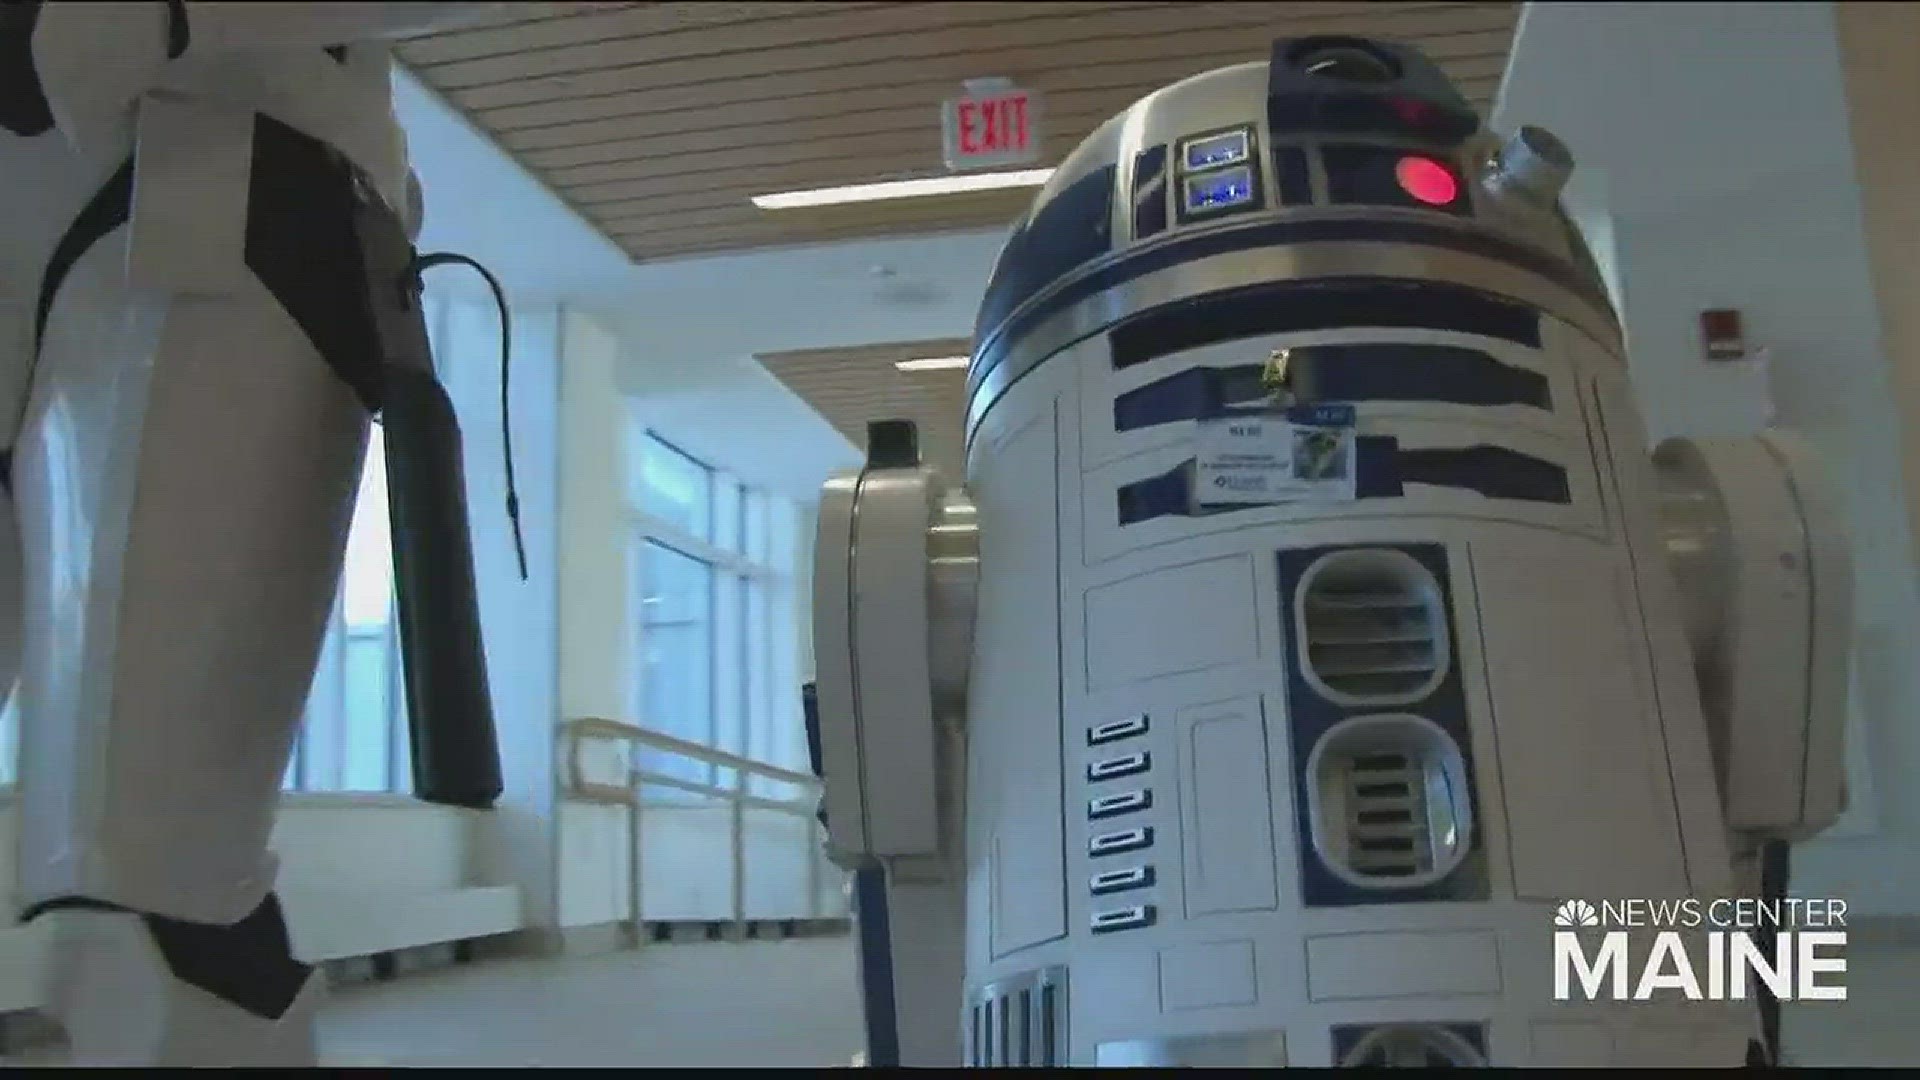 Young patients in the pediatric unit at Eastern Maine Medical Center got a visit from a Star Wars storm trooper and R2-D2.